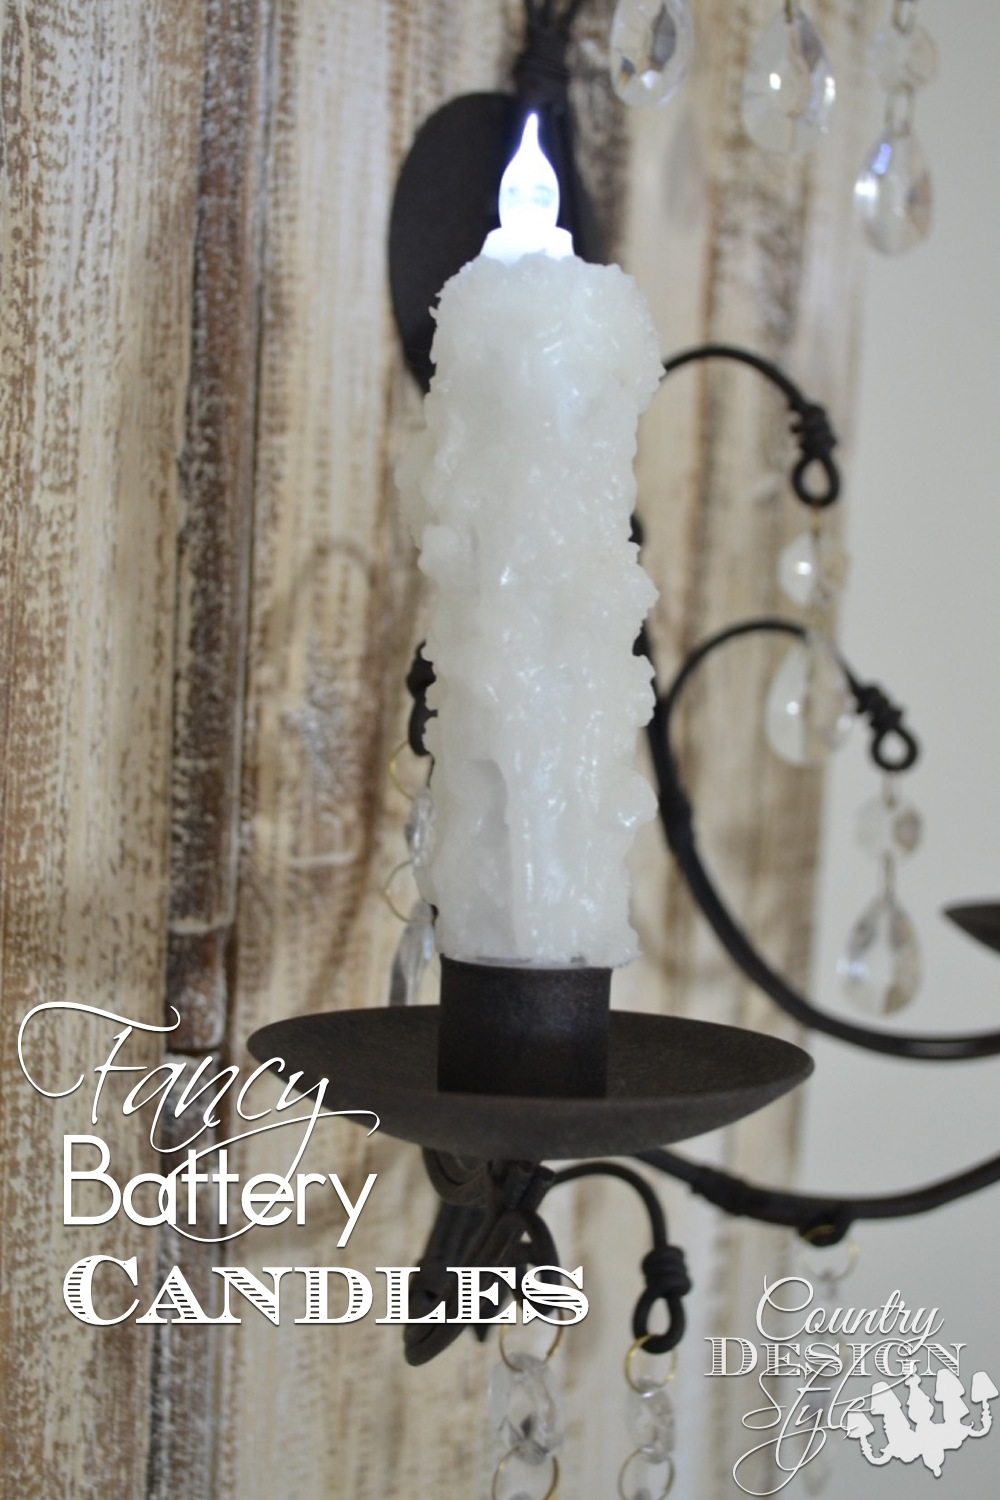 How to make inexpensive battery candles "fancy!" I add melted wax to battery candles for an elegant look. Great DIY decor for farmhouse, cottage or cabin style. Fun for parties, events, and celebrations Country Design Style www.countrydesignstyle.com